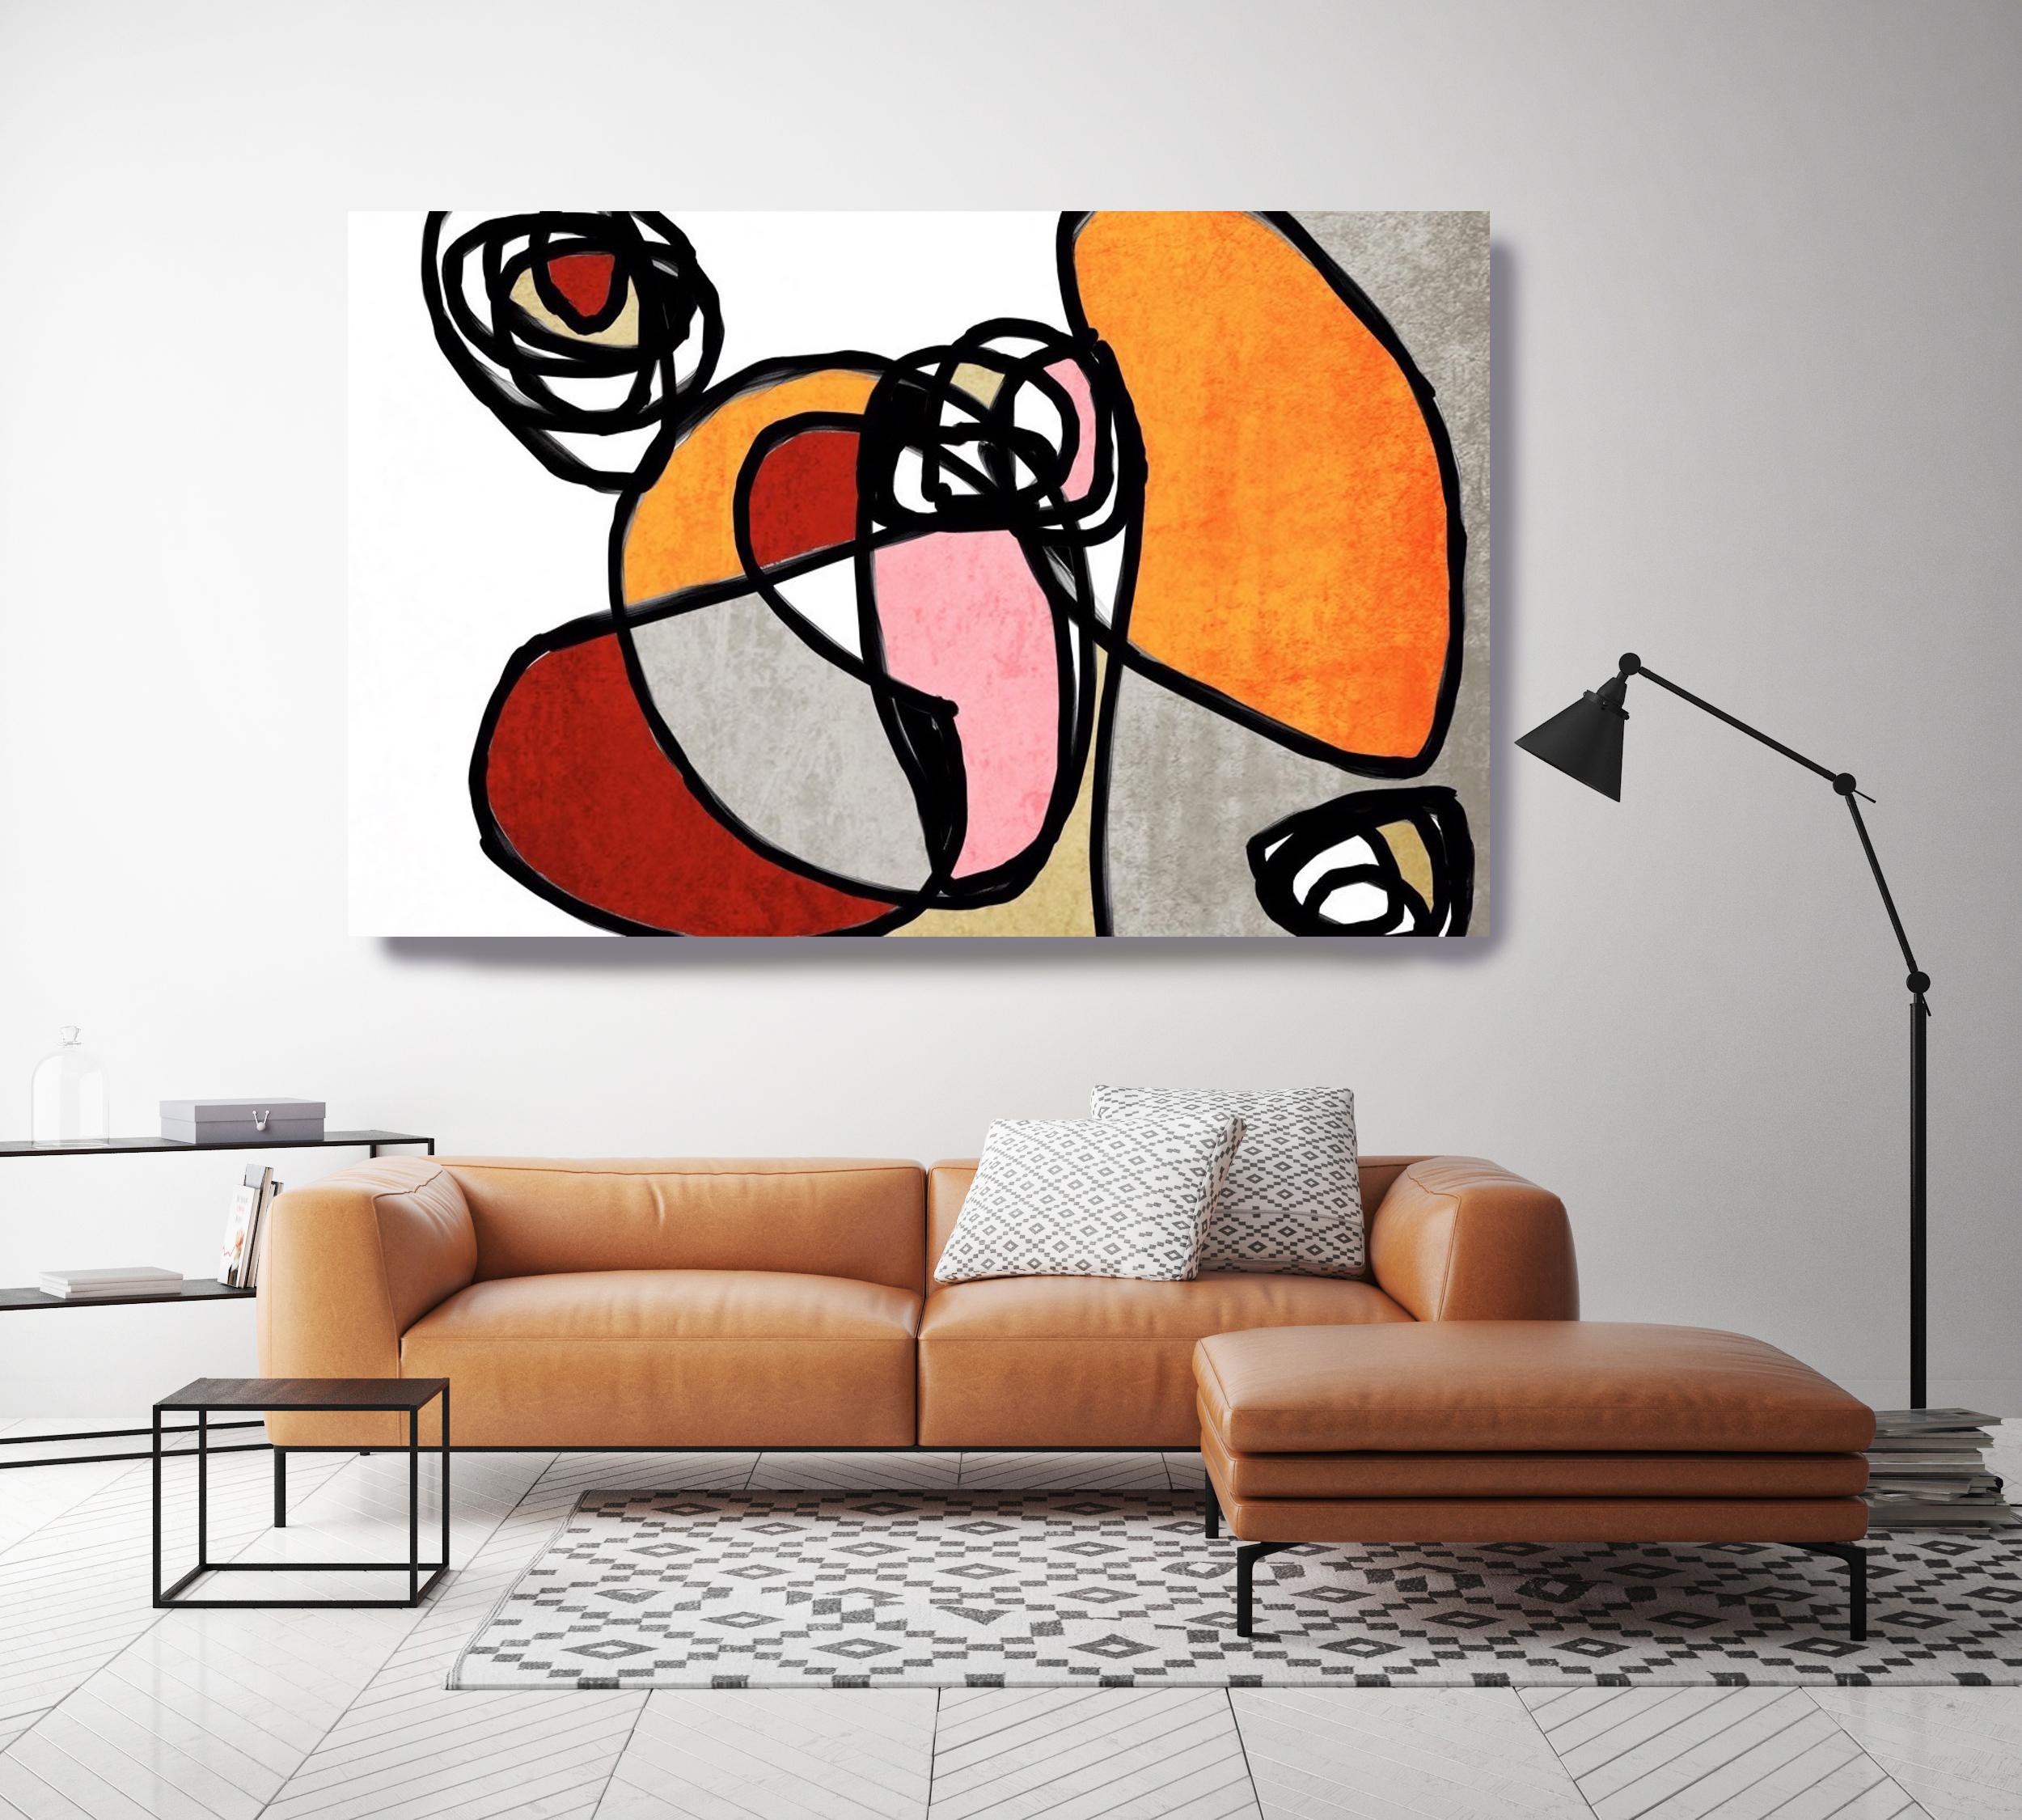 Orange Grey Mid Century Modern Painting Hand Embellished Giclee on Canvas
ORL-6857 Vibrant Colorful Abstract-0-30

State-of-the-art HAND EMBELLISHED ∽ MUSEUM QUALITY ∽ DISPLAY READY Giclee Reproduction
Each limited edition Giclee is hand embellished